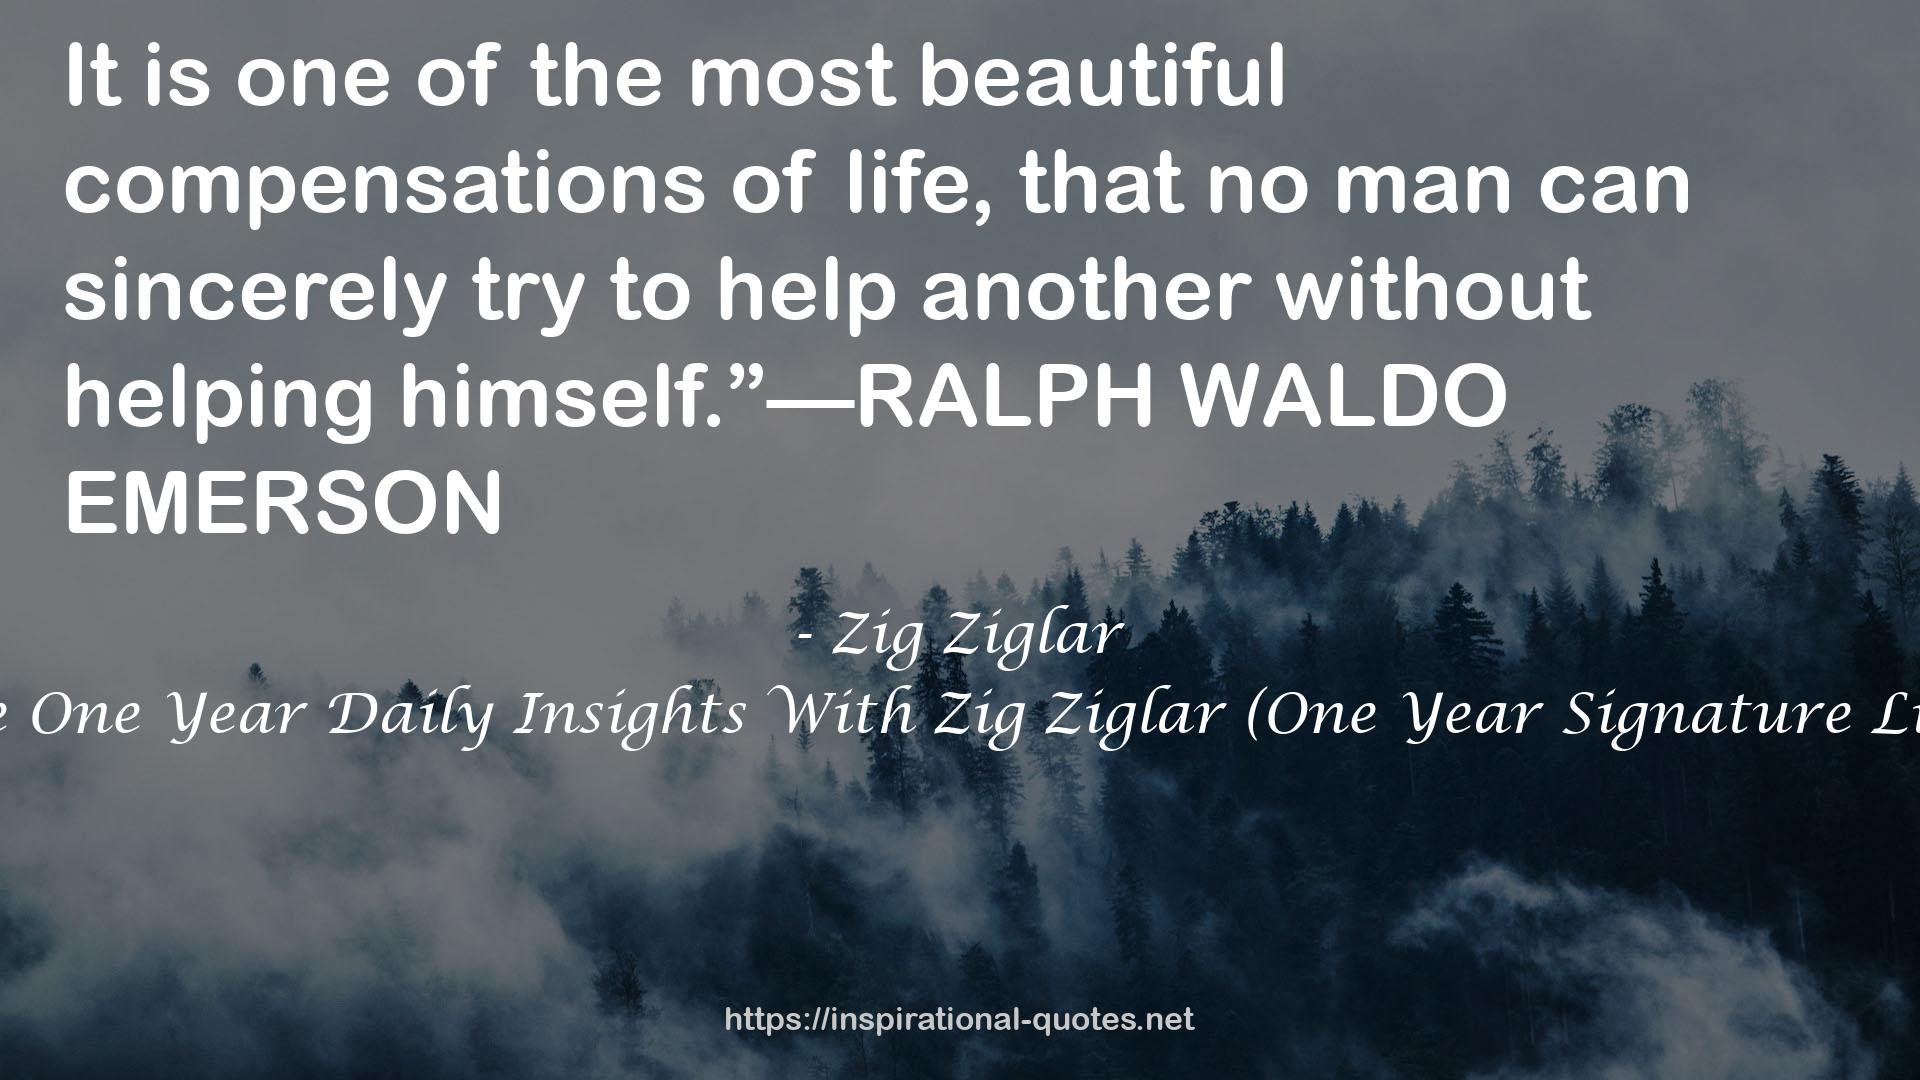 The One Year Daily Insights With Zig Ziglar (One Year Signature Line) QUOTES